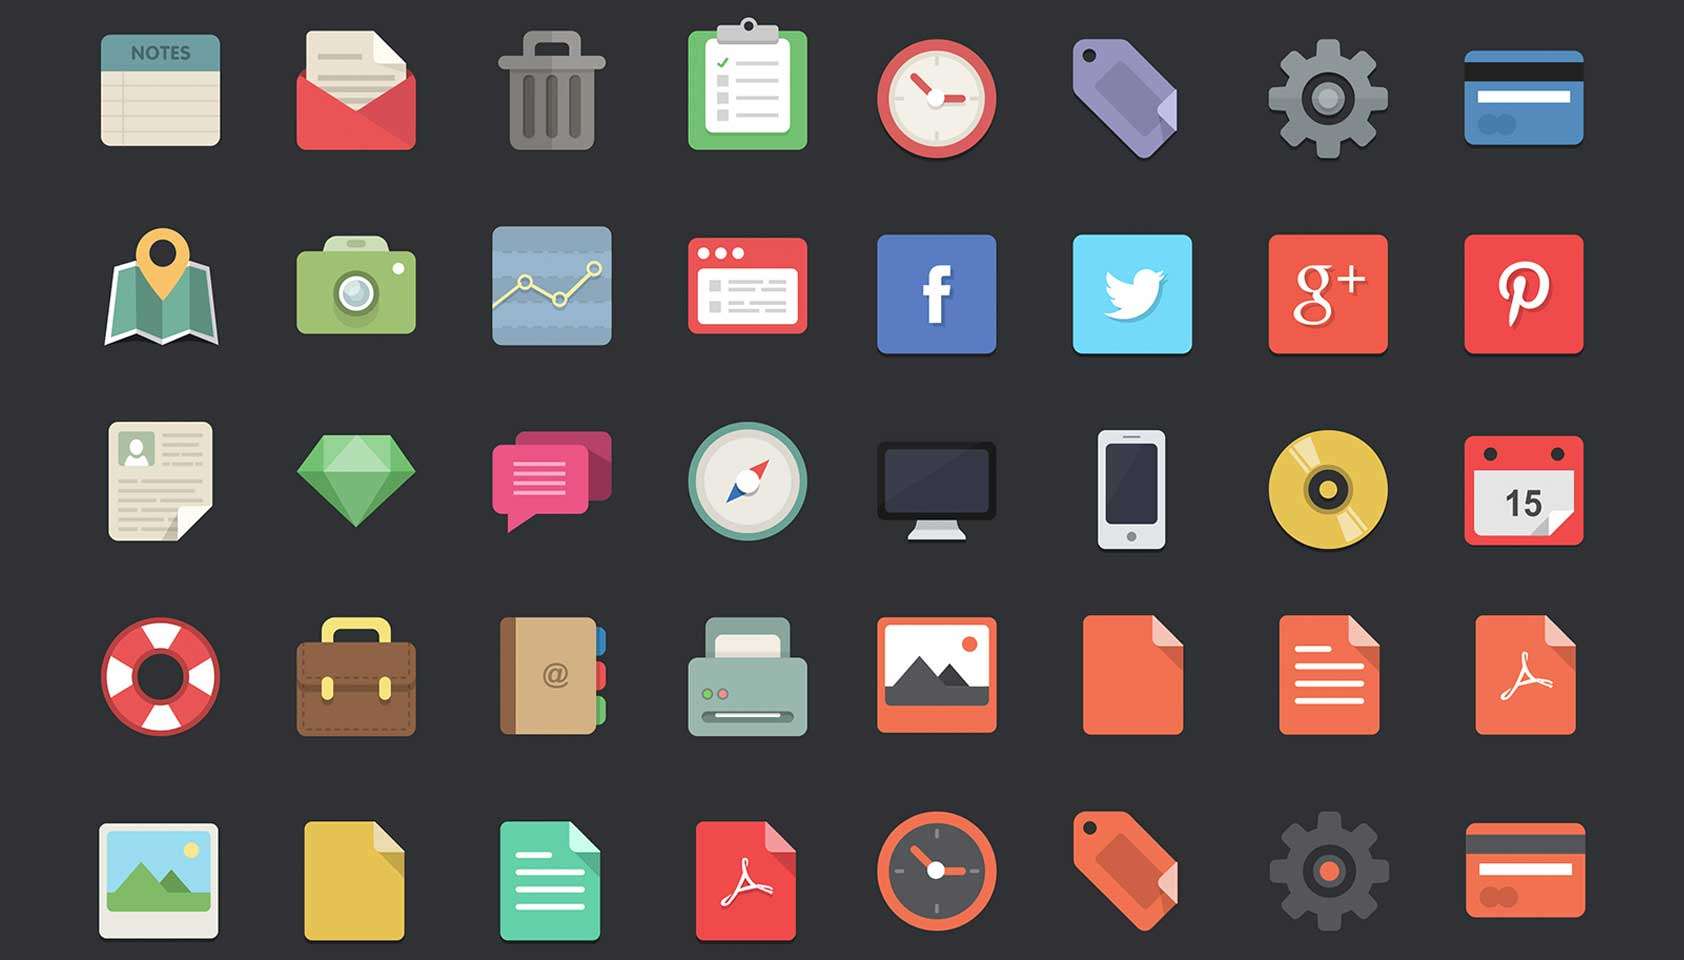 niomby.blogg.se - Free icons for website